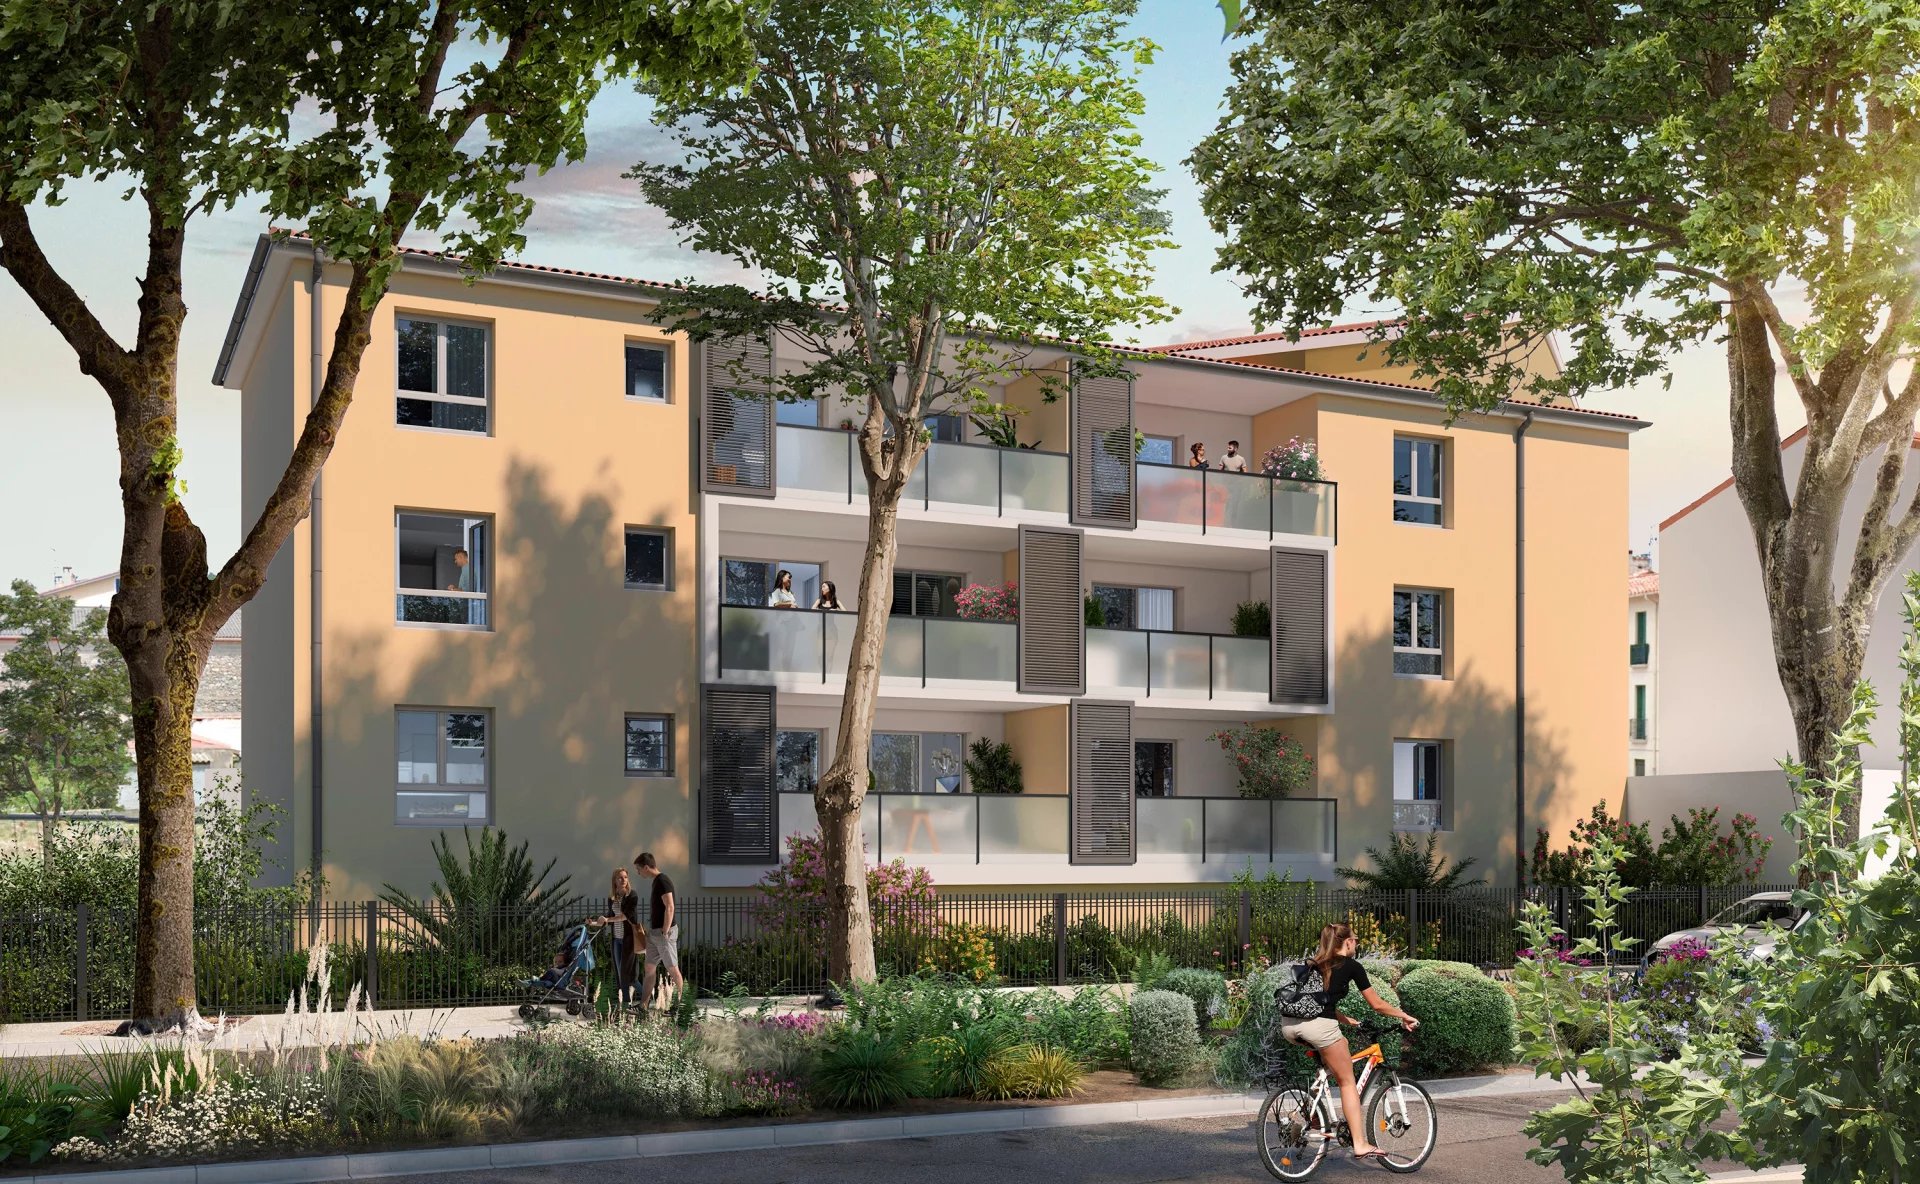 OFF-PLAN 1-BED APPARTMENT (LOT 301), RESIDENCE L'ANGLE DES ARTS, CERET